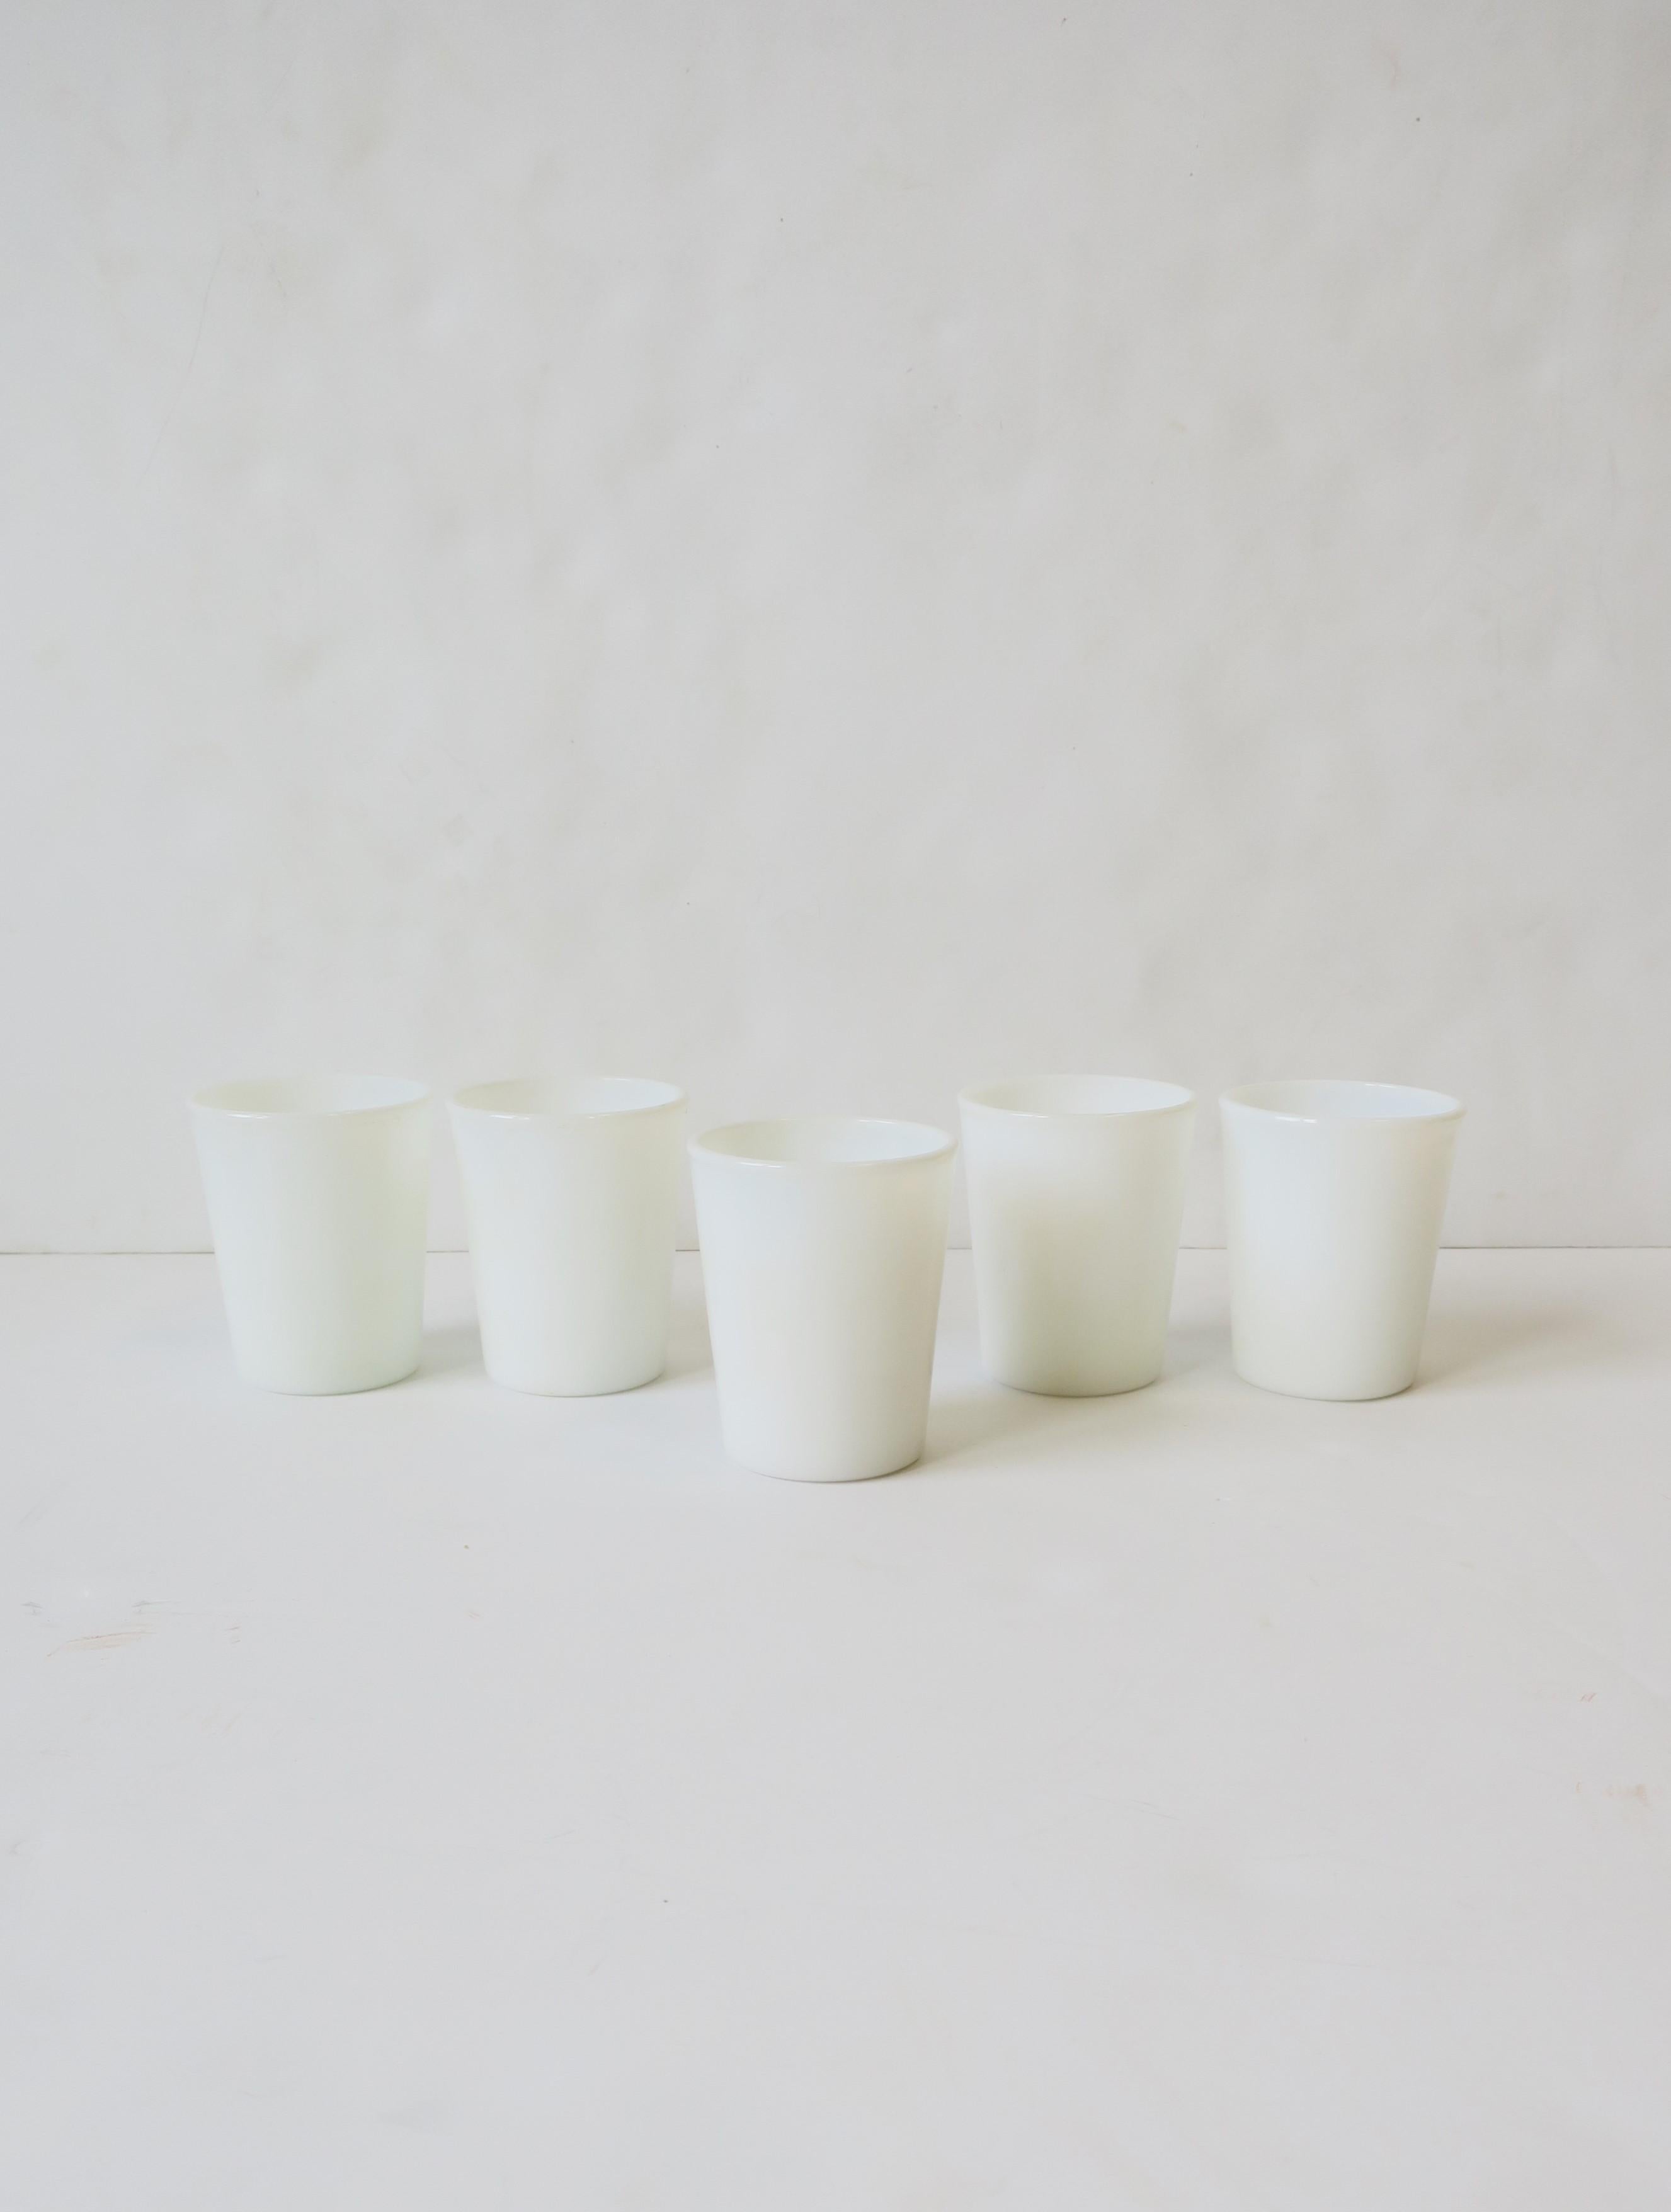 White Milk Glass Cocktail Tumbler Glasses, Set of 5, Early 20th Century 4